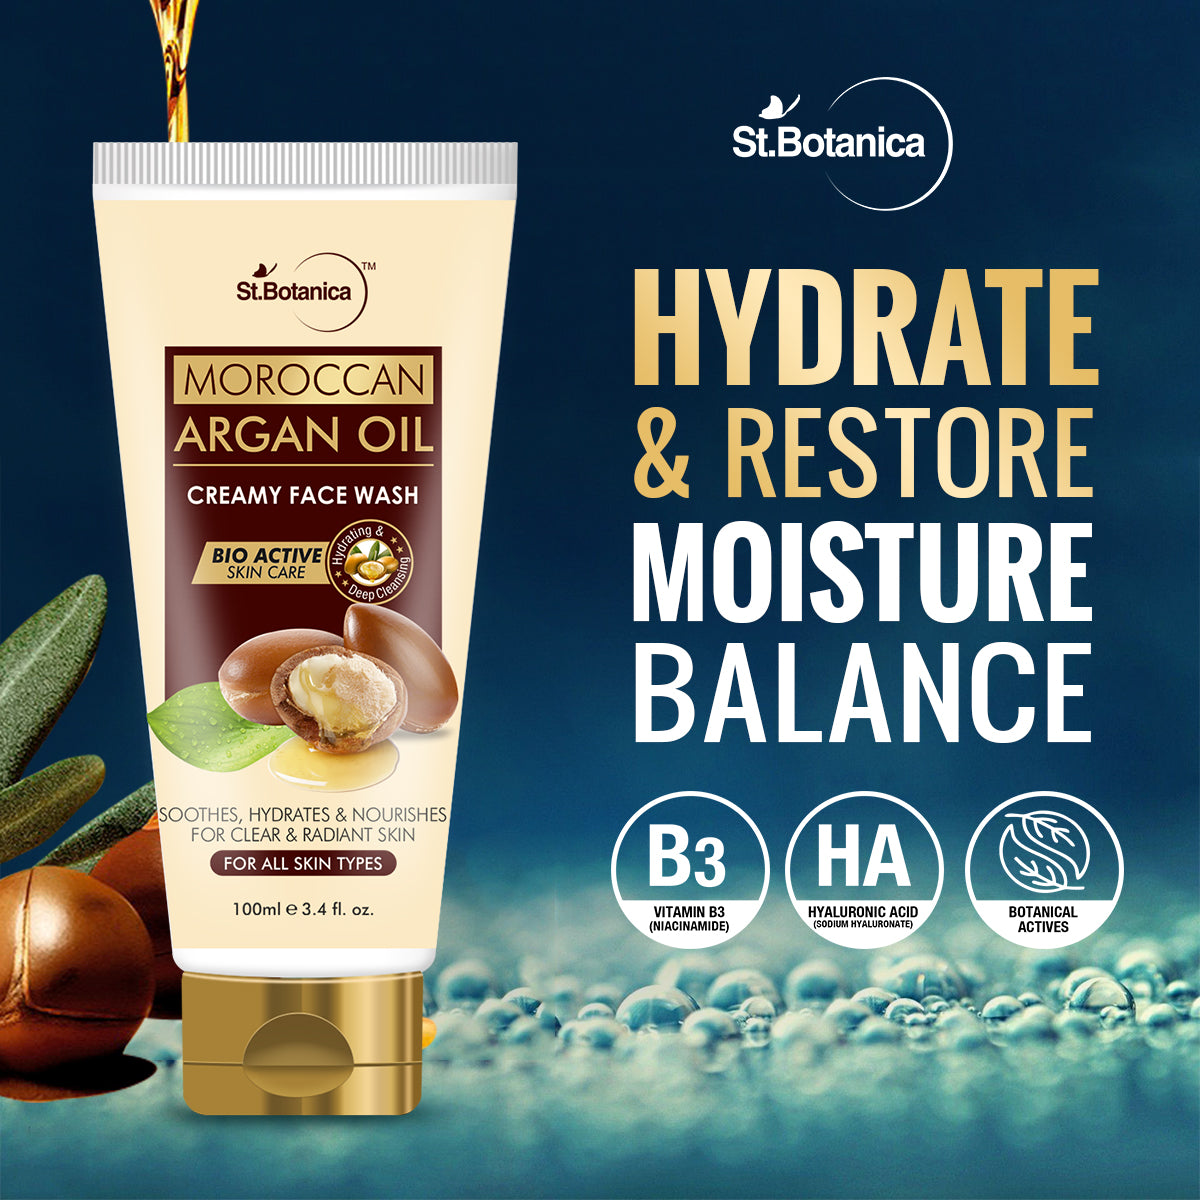 St.Botanica Moroccan Argan Oil Creamy Face Wash - Soothes, Hydrates, Nourishes For Clear & Radiant Skin - No Parabens, Sulphate, Silicones, 100 ml (STBOT554)